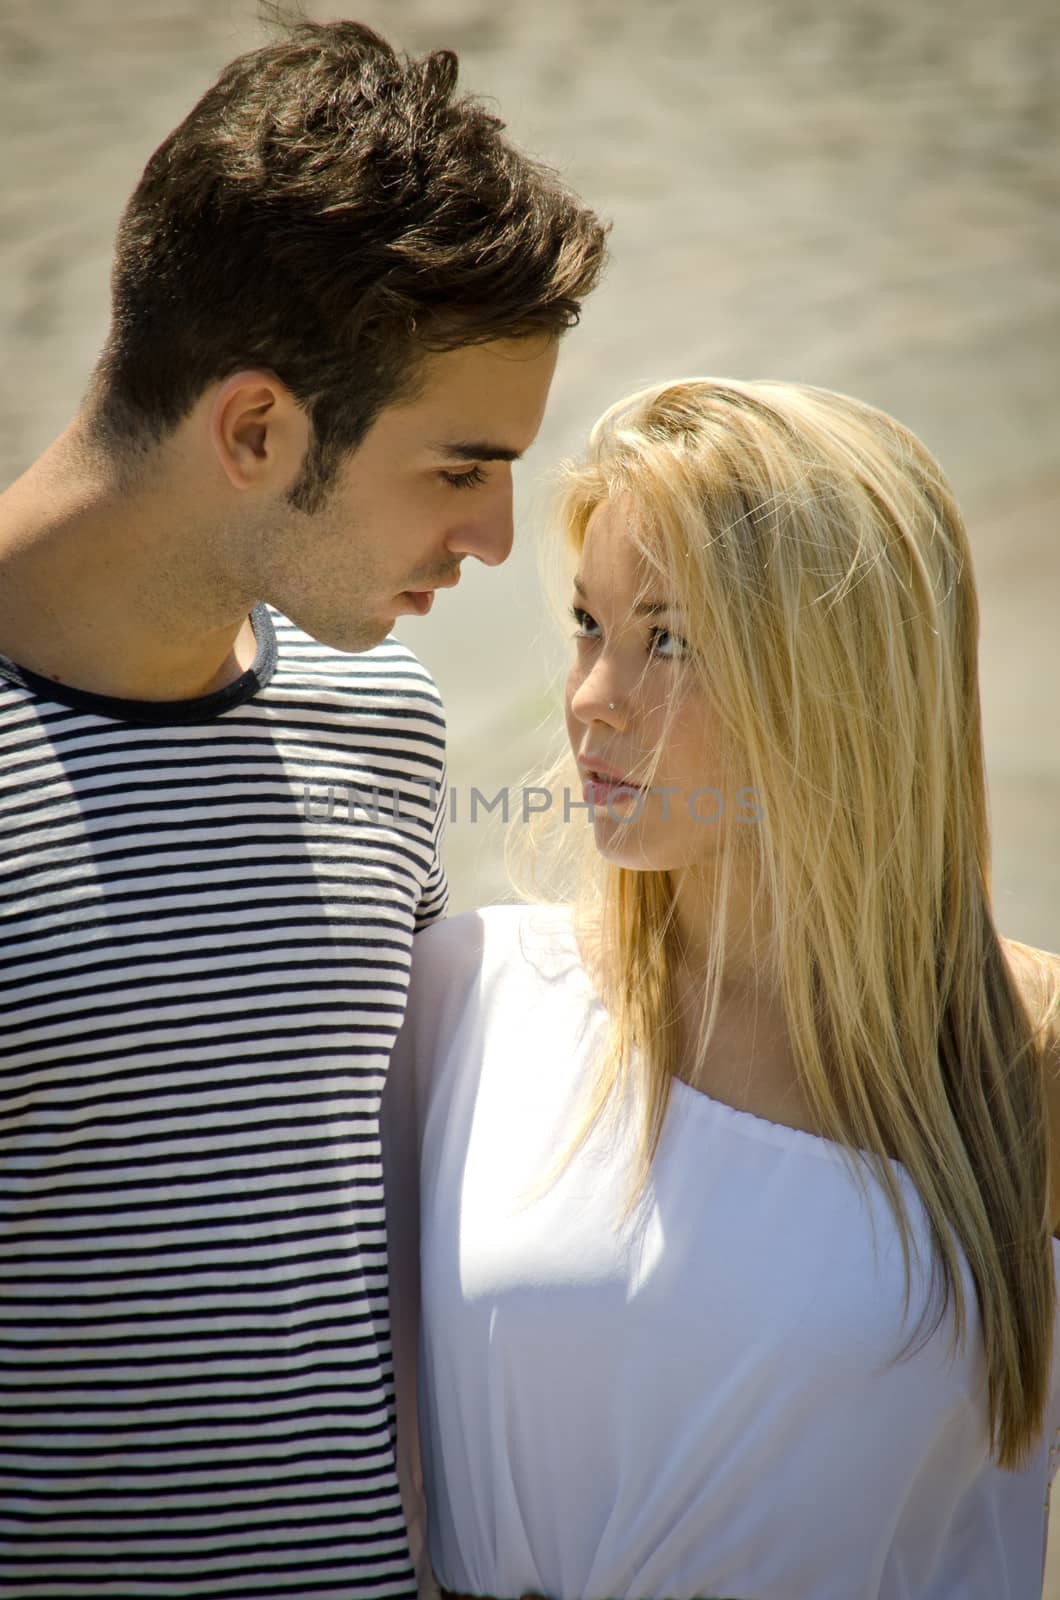 Romantic couple looking at each other by artofphoto